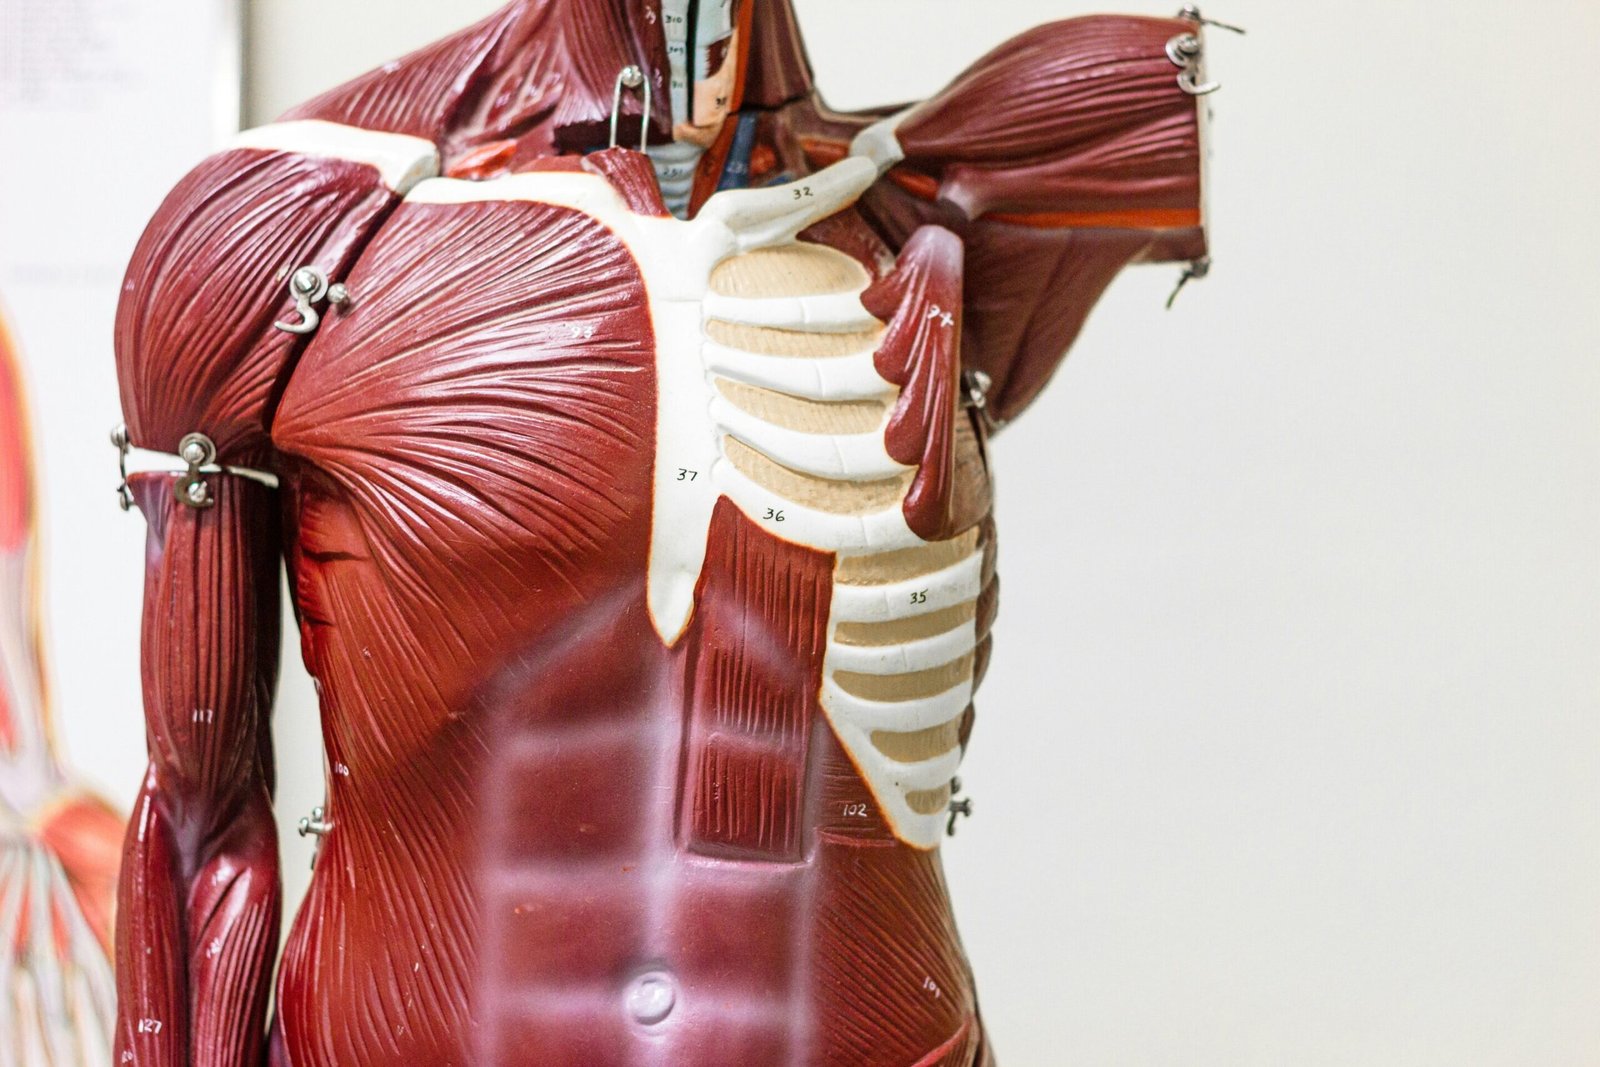 Body organs aren’t always where they are supposed to be